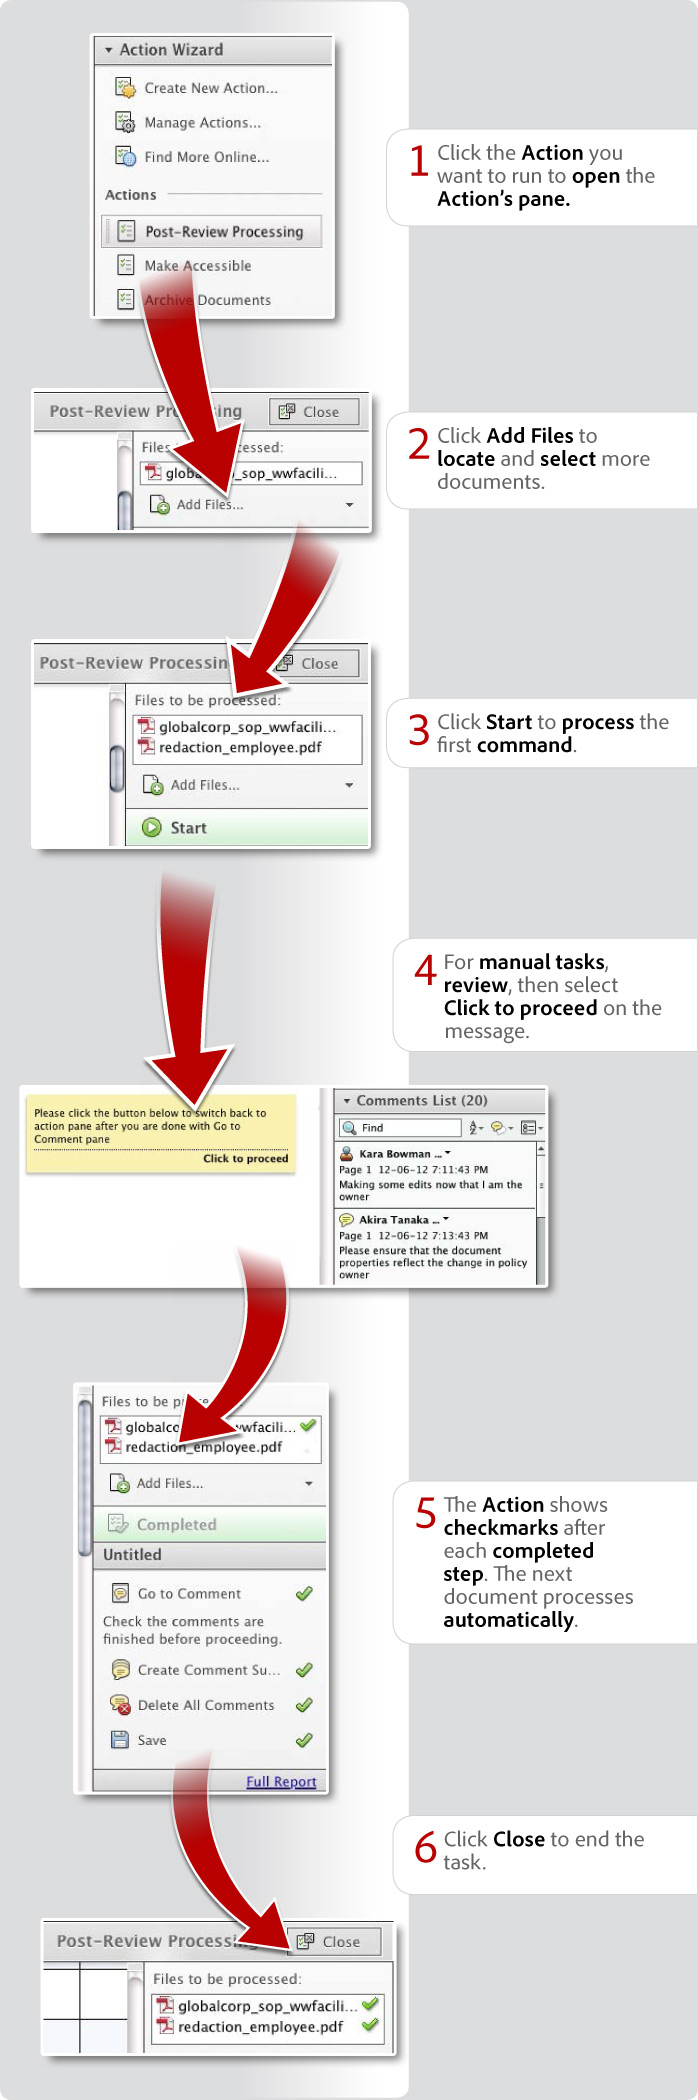 How to work with Actions in Acrobat XI Pro